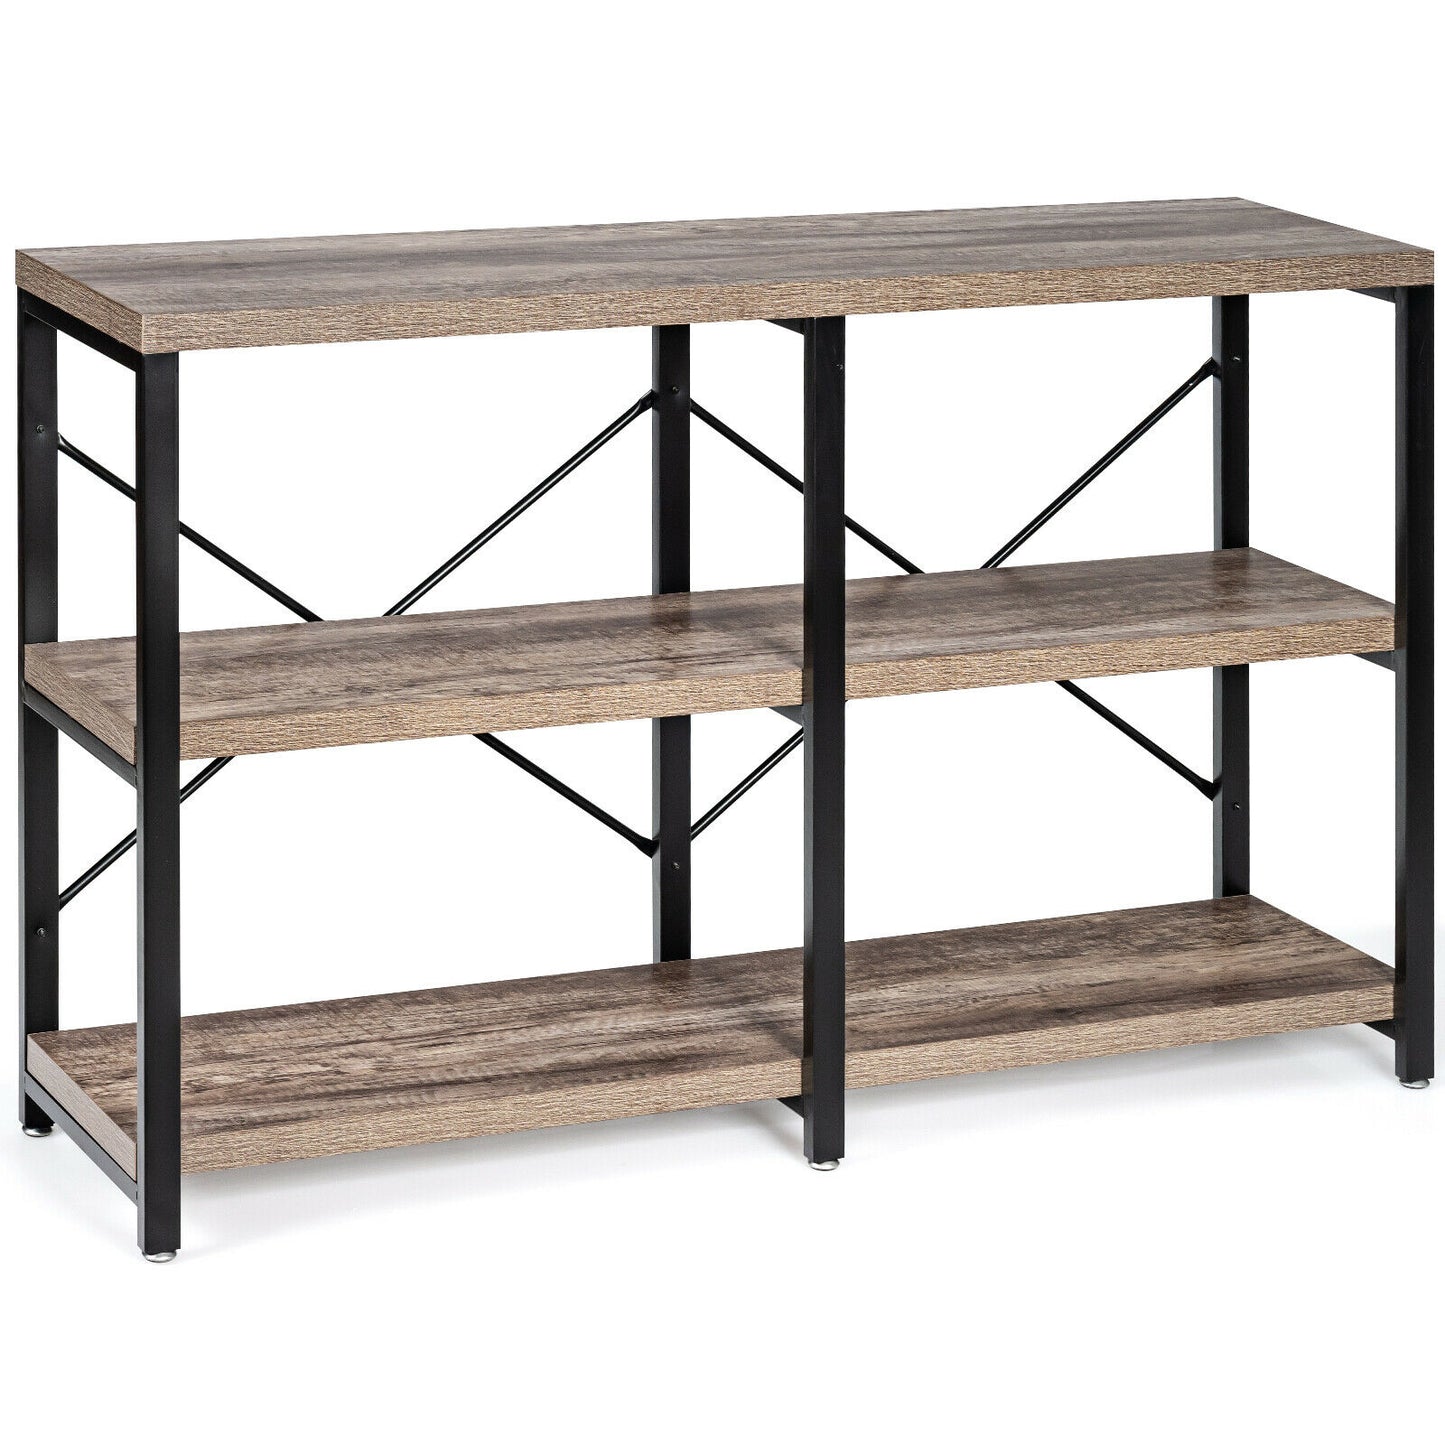 3-Tier Console Table Rustic X-Shaped with Shelves